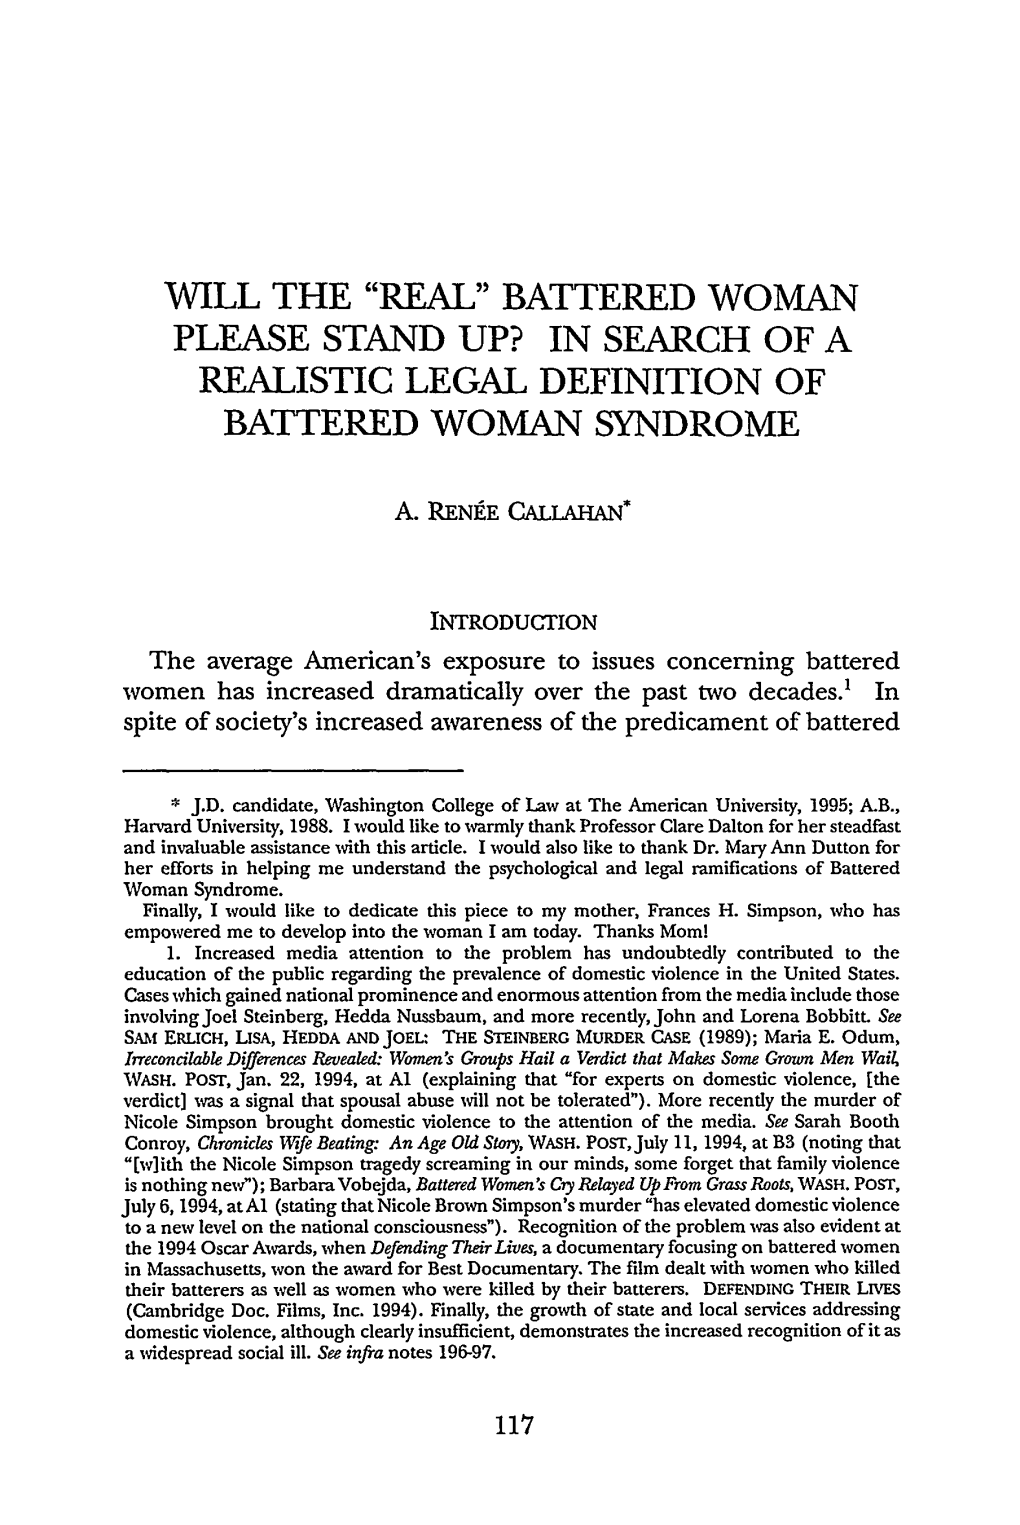 In Search of a Realistic Legal Definition of Battered Woman Syndrome